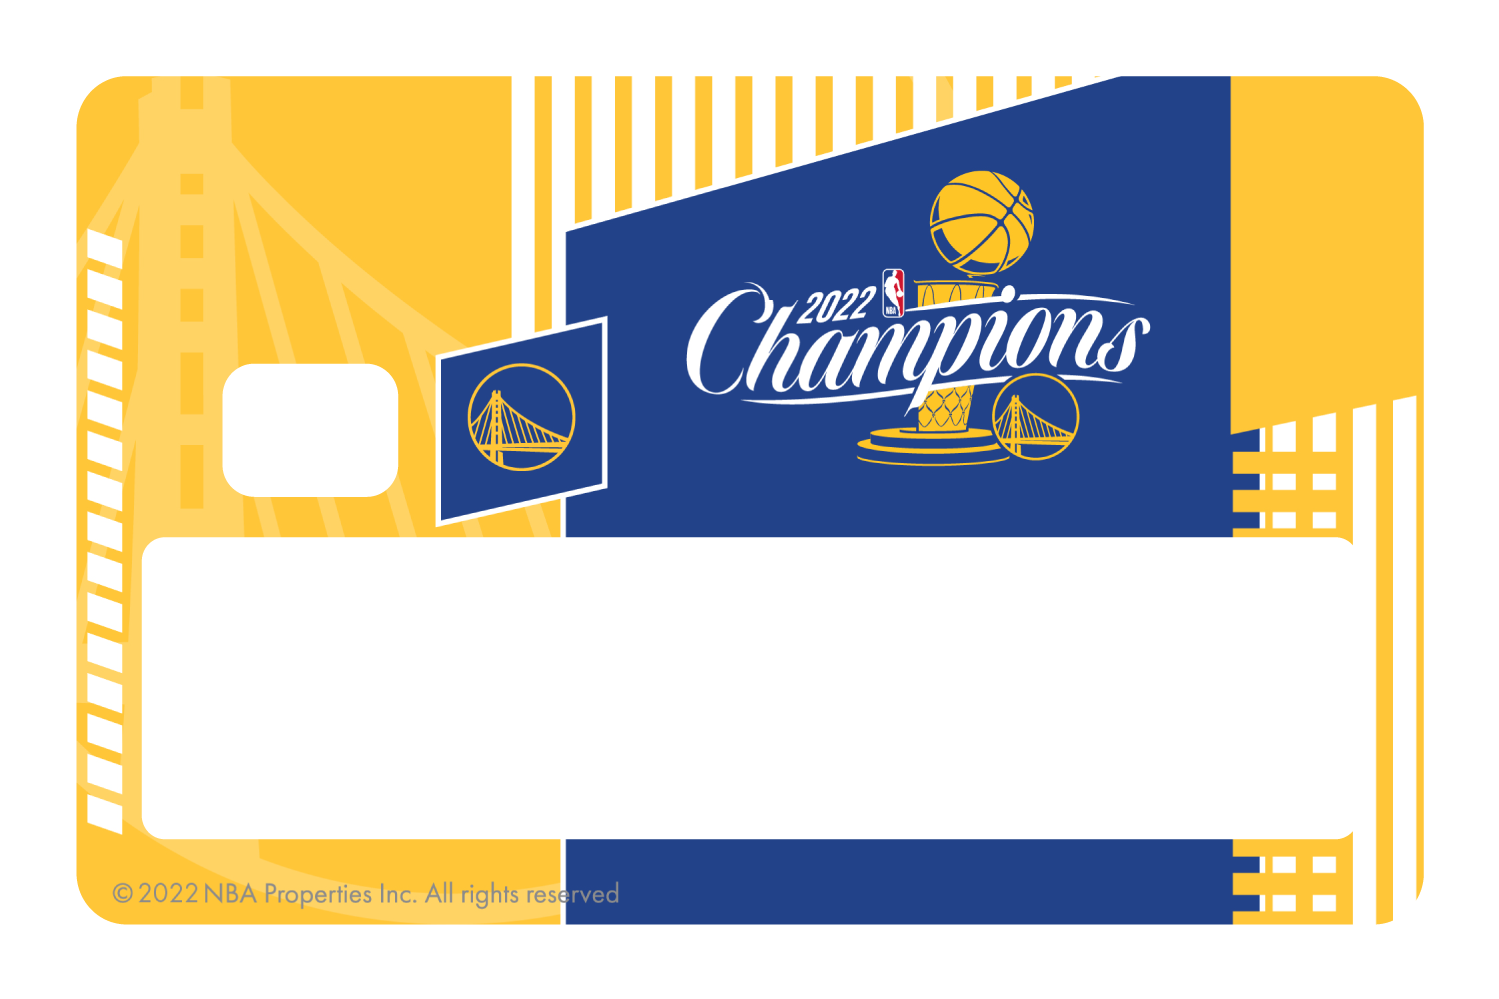 2022 NBA Champions: Golden State Warriors - Strength in Numbers